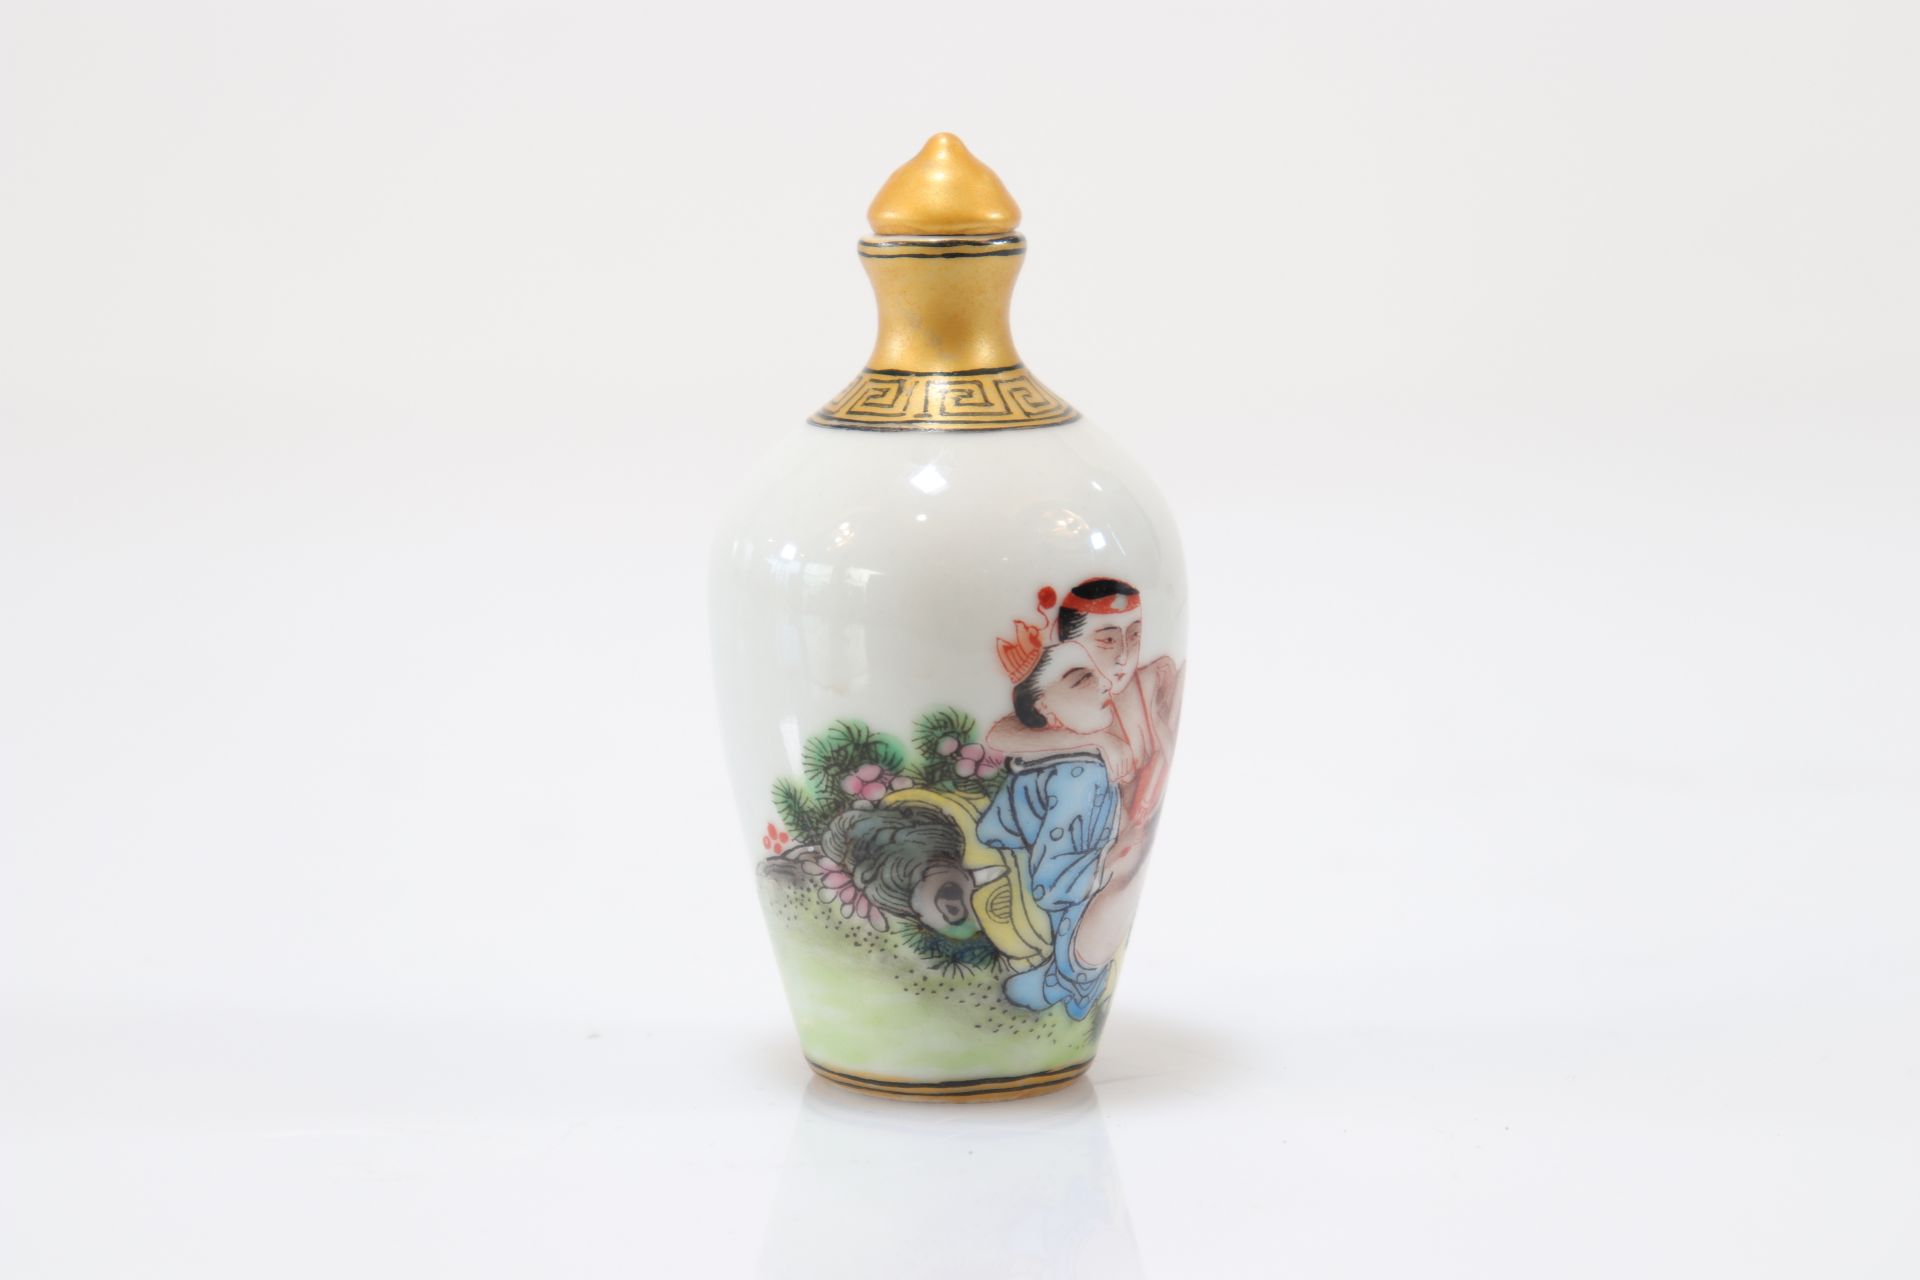 Chinese porcelain snuffbox with erotic decor - Image 2 of 4